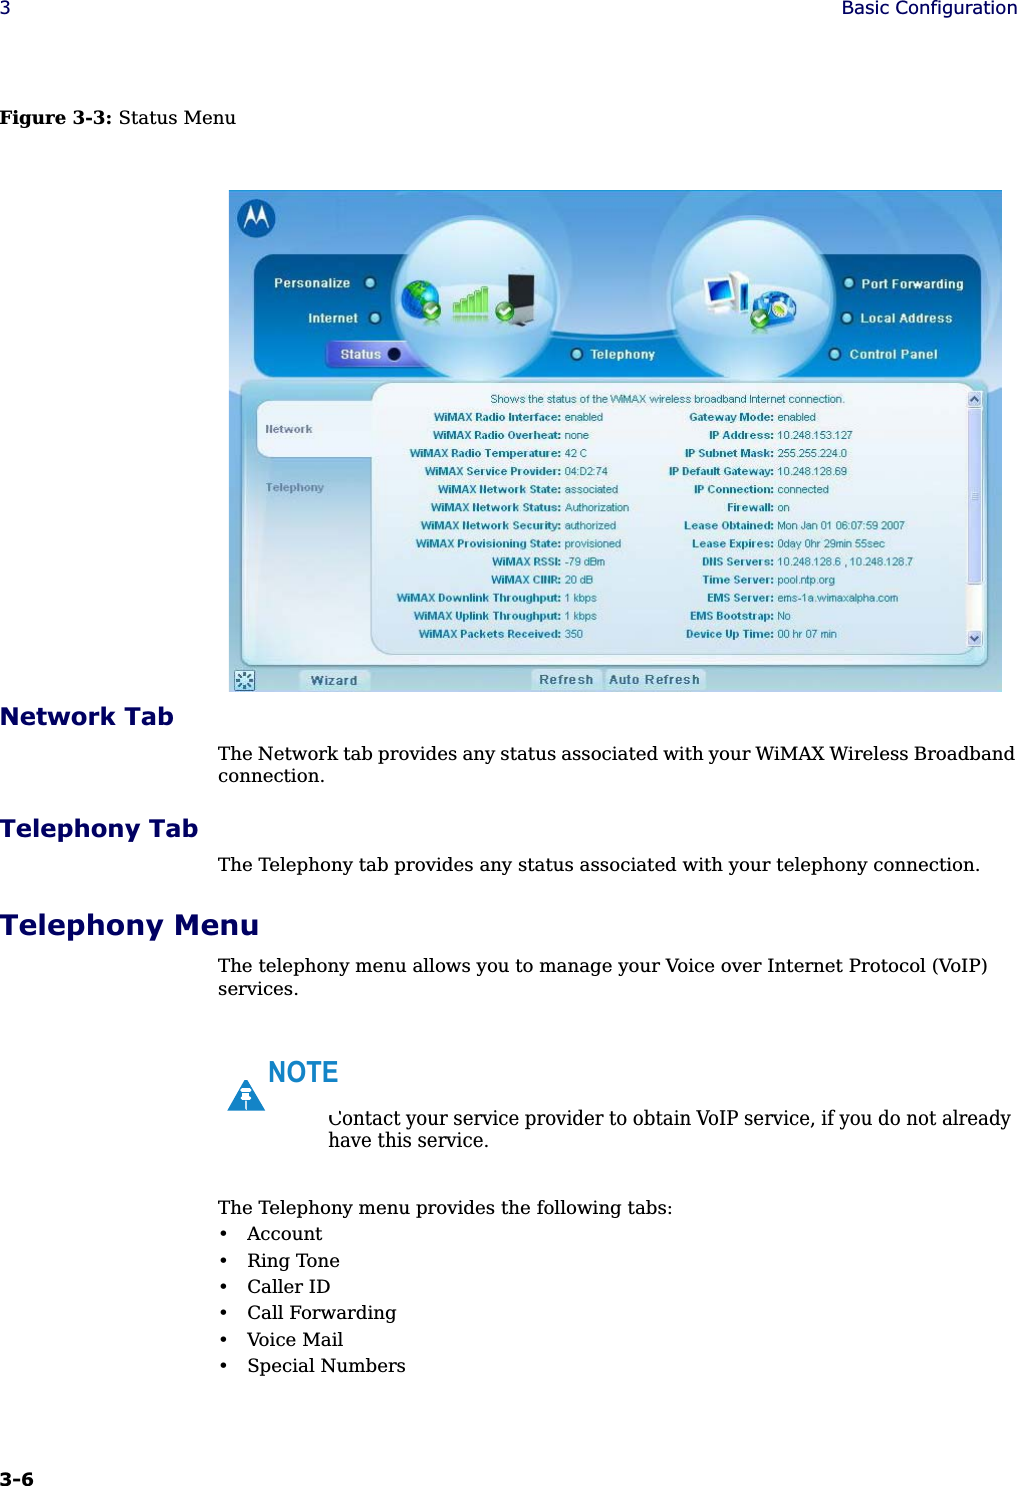 3-6 3Basic ConfigurationFigure 3-3: Status MenuNetwork TabThe Network tab provides any status associated with your WiMAX Wireless Broadband connection.Telephony TabThe Telephony tab provides any status associated with your telephony connection.Telephony MenuThe telephony menu allows you to manage your Voice over Internet Protocol (VoIP) services. The Telephony menu provides the following tabs:• Account• Ring Tone• Caller ID• Call Forwarding• Voice Mail• Special NumbersContact your service provider to obtain VoIP service, if you do not already have this service.NOTE